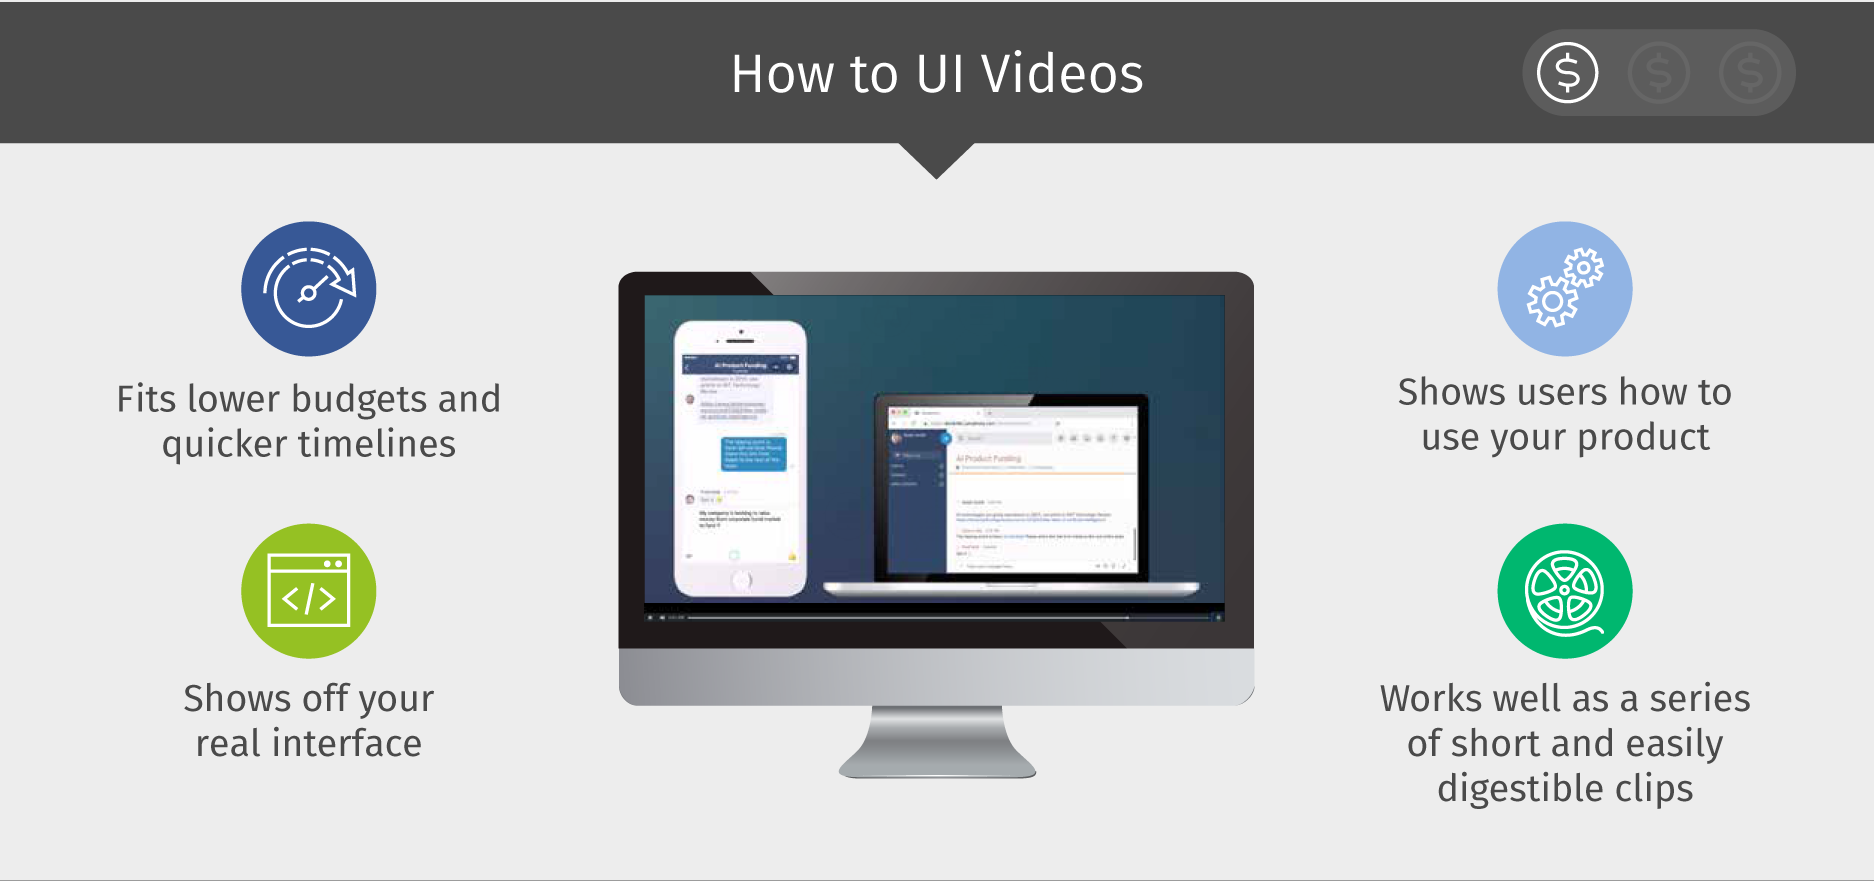 How to UI Videos